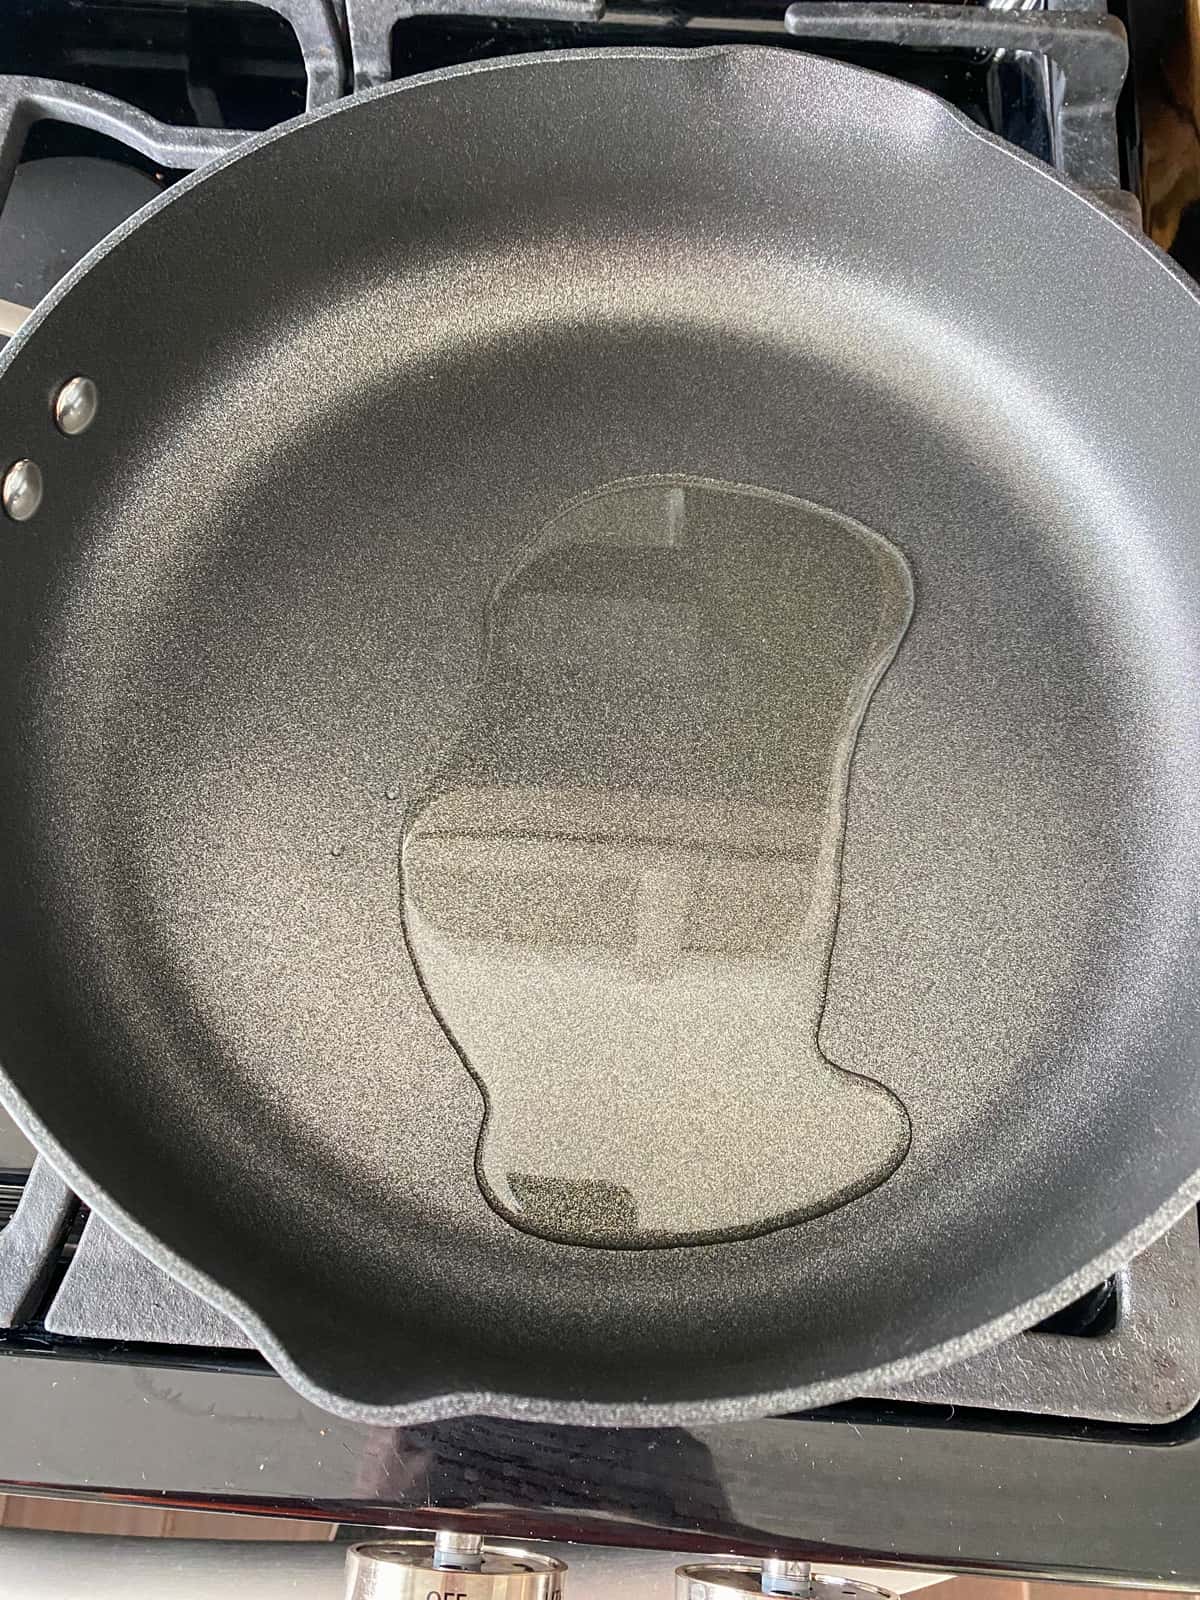 Oil heating in a skillet.